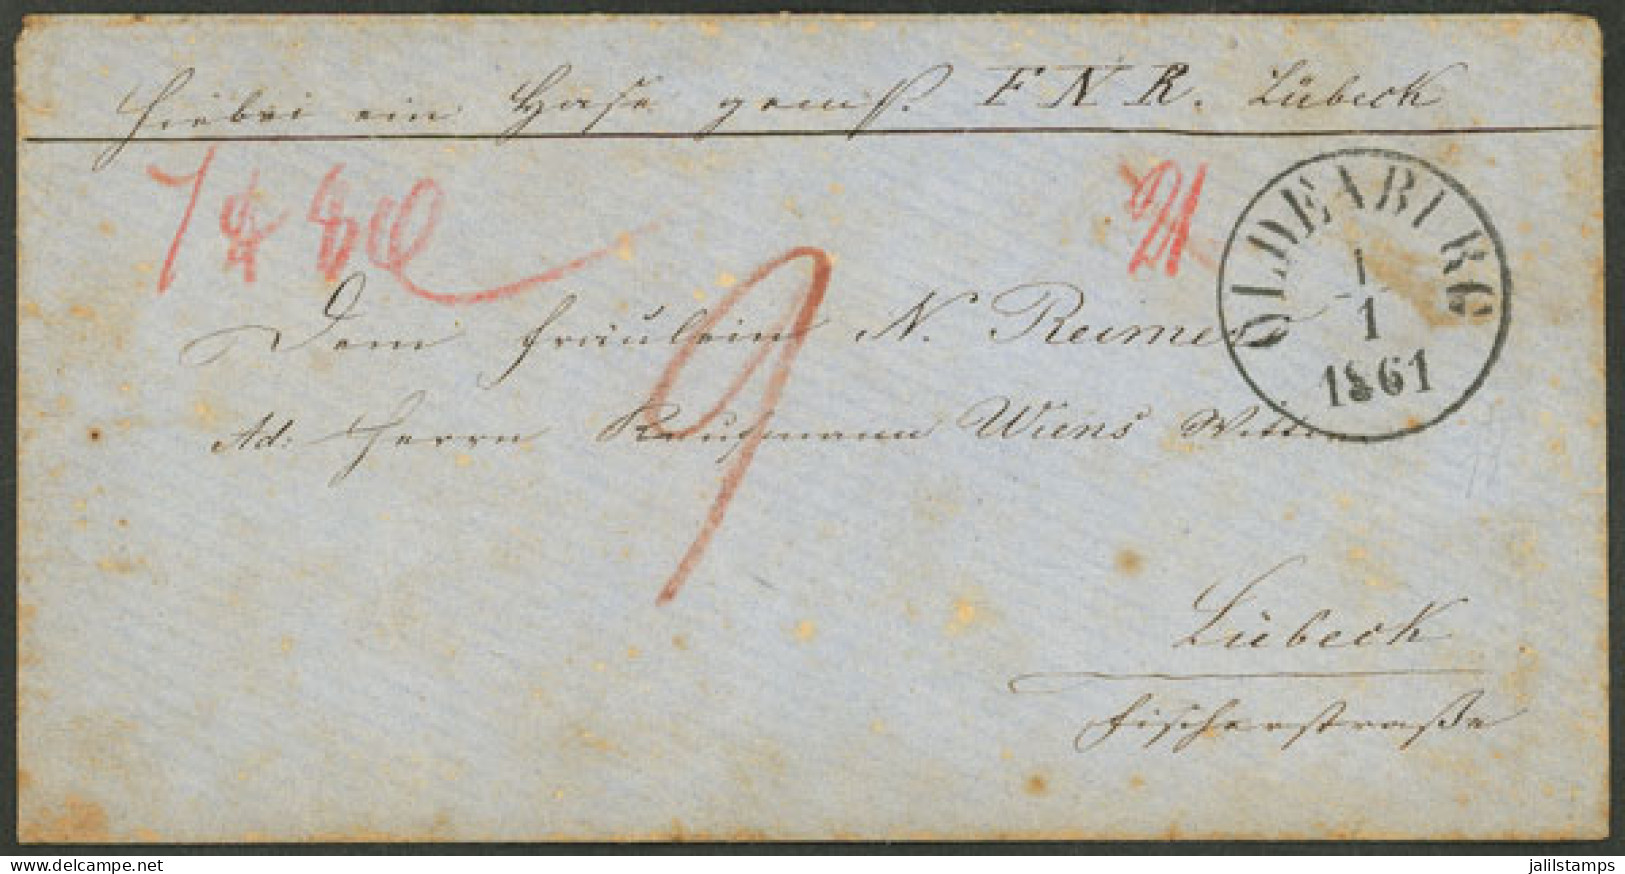 GERMANY: 1/JA/1861 Oldenburg - Lübeck, Cover Without Postage, With Nice Cancels And Interesting Hand-written Marks! - Covers & Documents